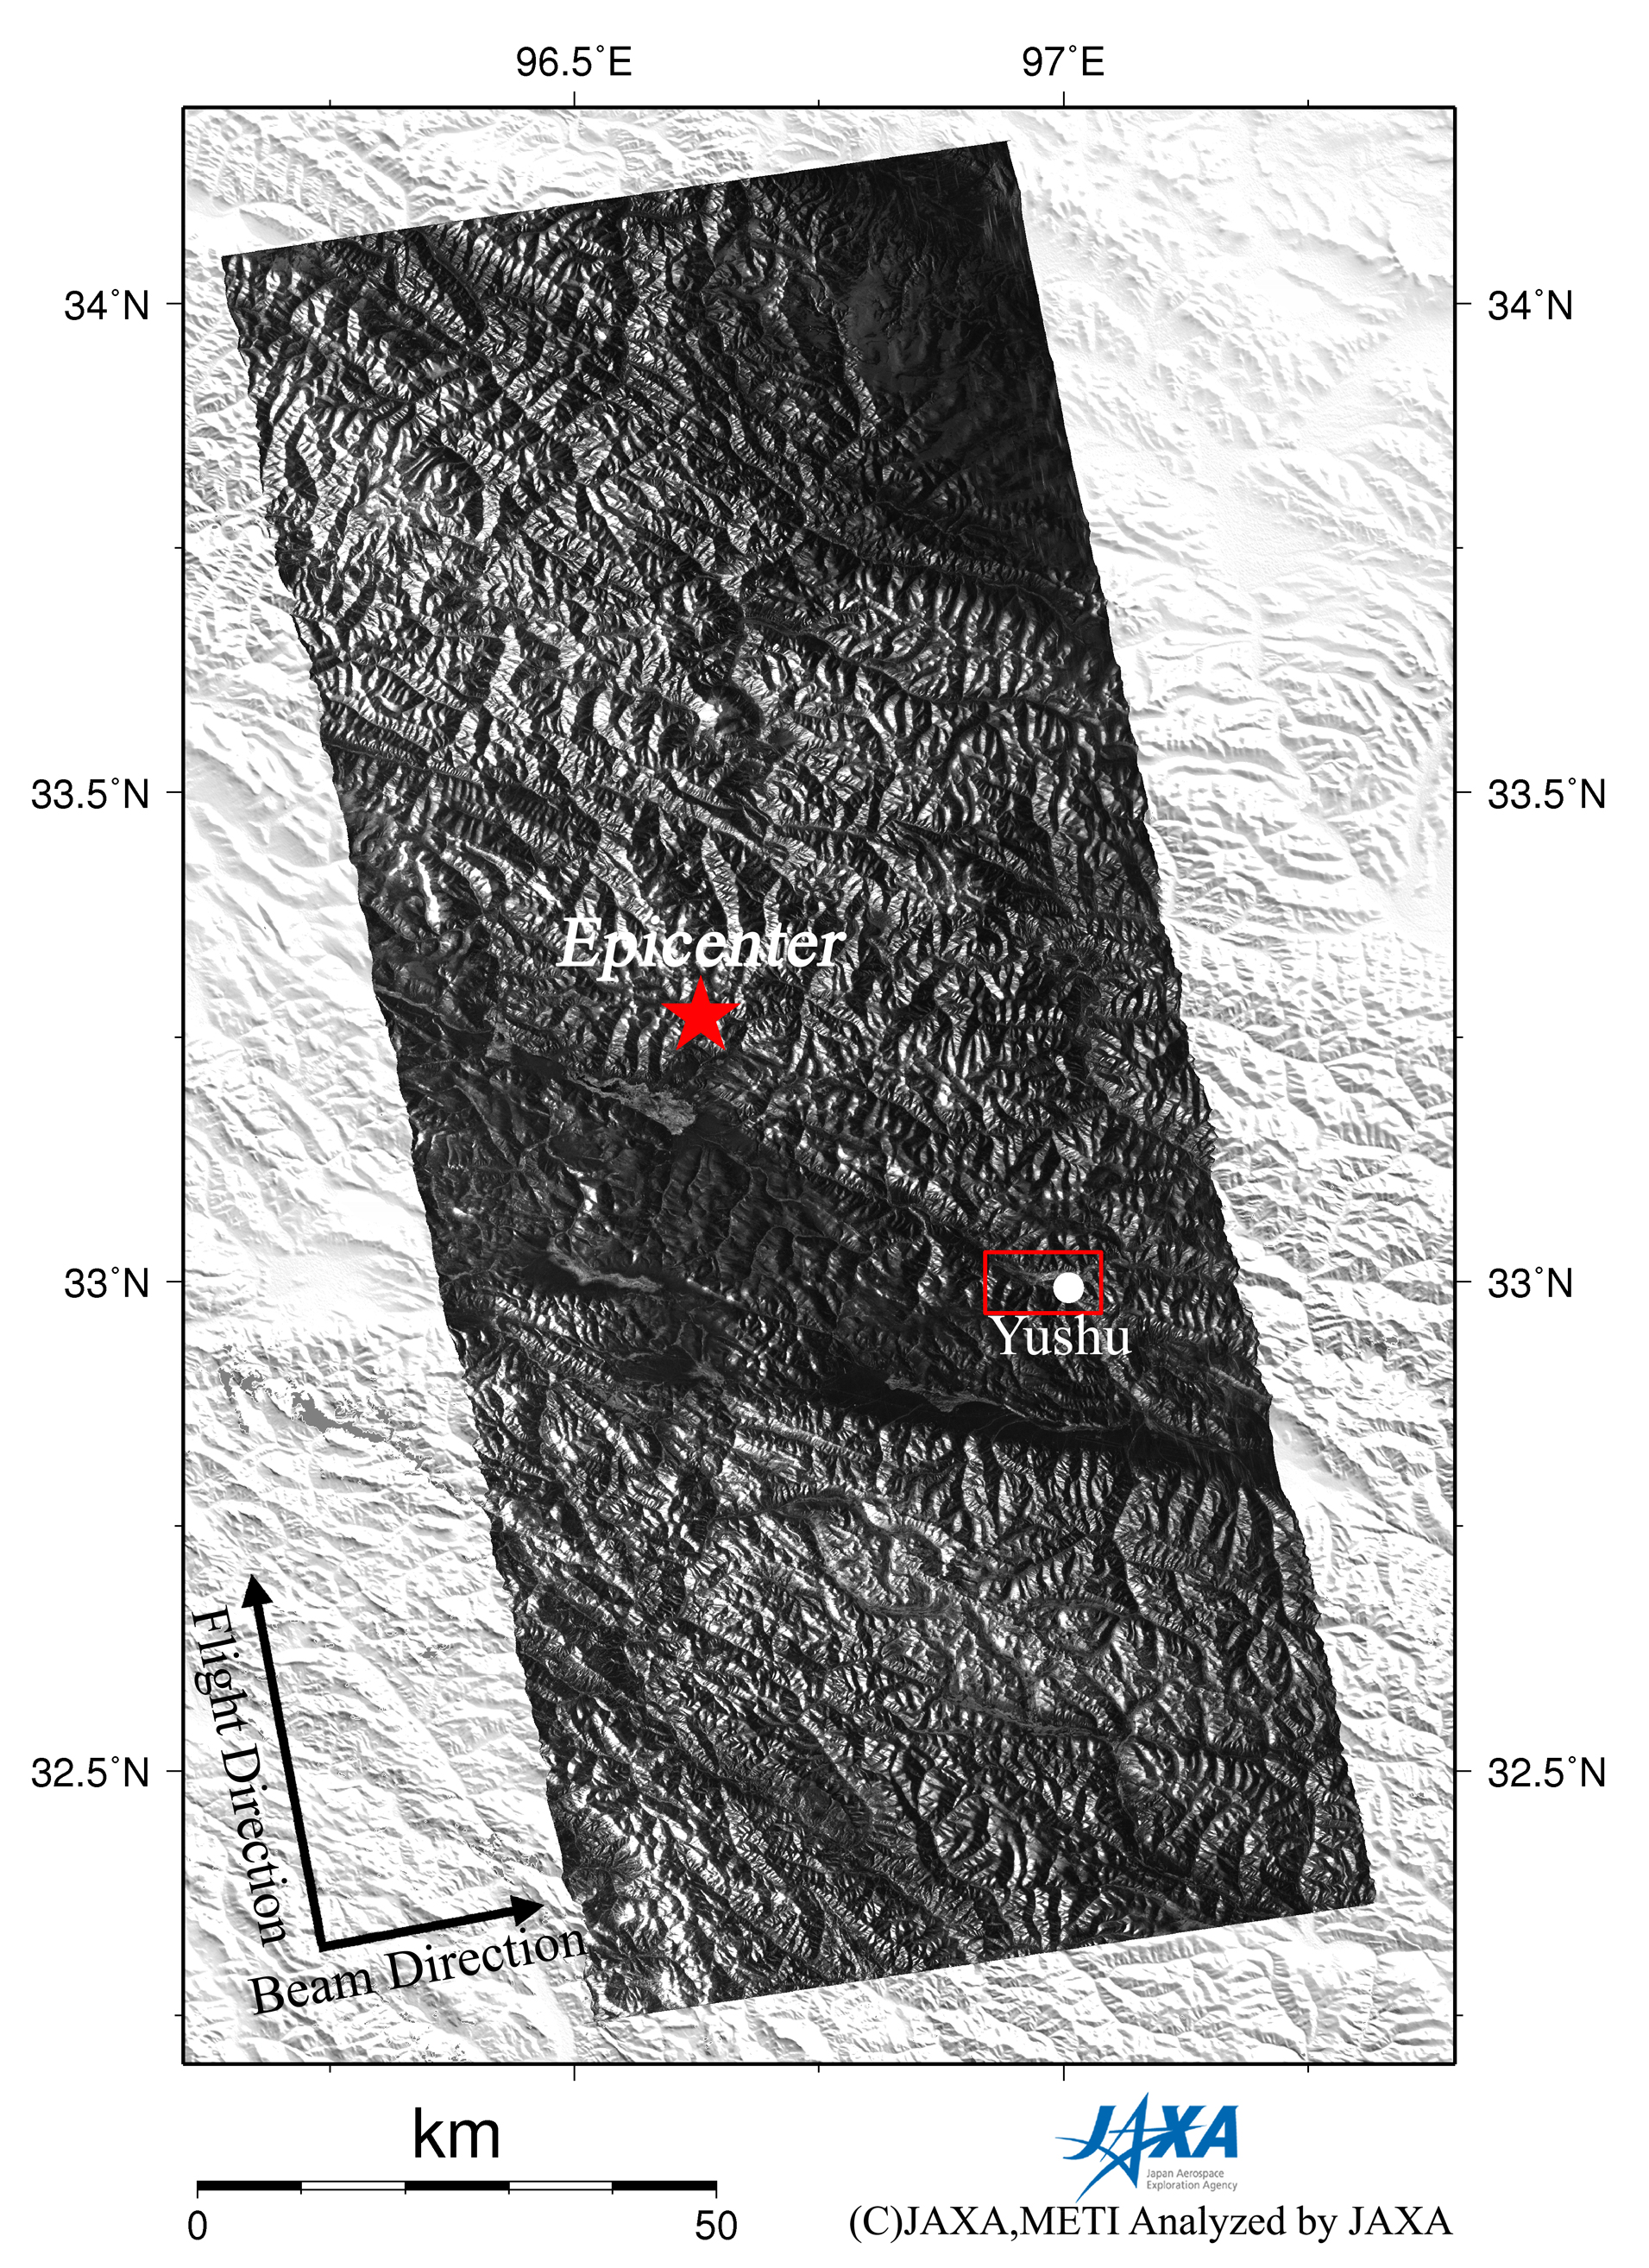 Figure 2 right is a PALSAR amplitude image acquired after the earthquake (Apr. 17, 2010) indicating an observation field of 200km from south to north.